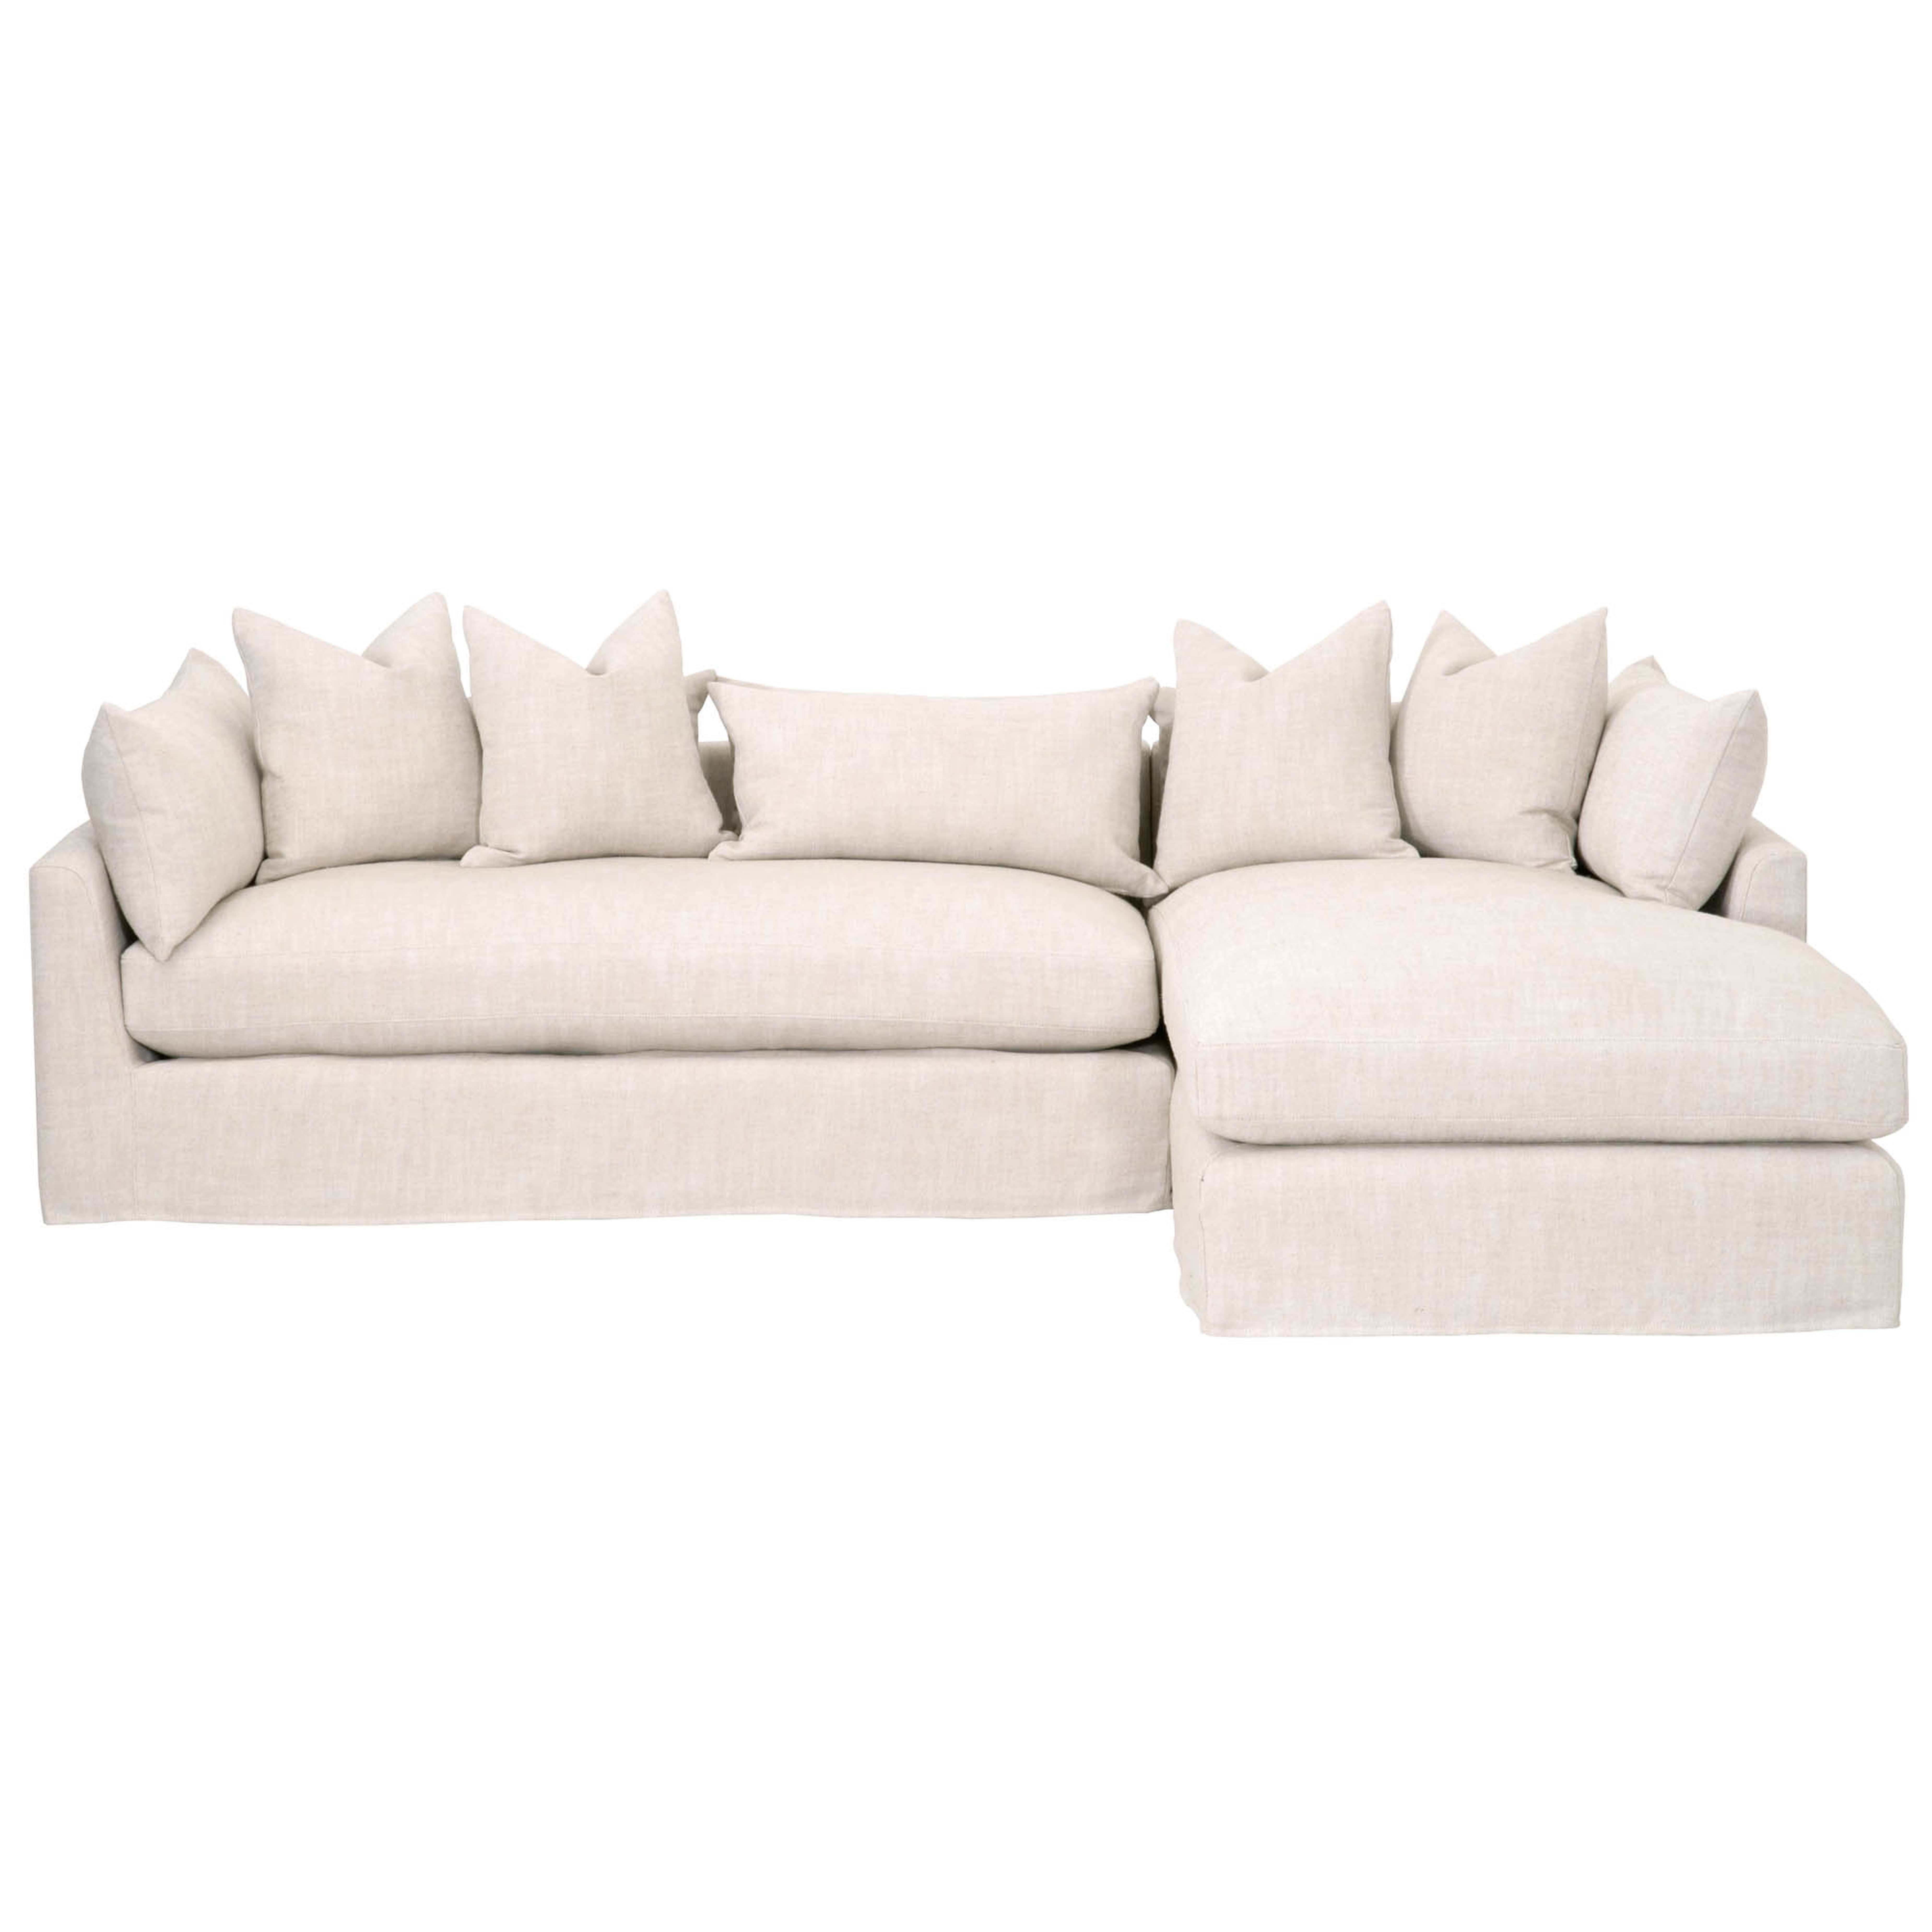 Haven 110" Right Facing Lounge Slipcover Sectional, Bisque, Espresso - Alder House